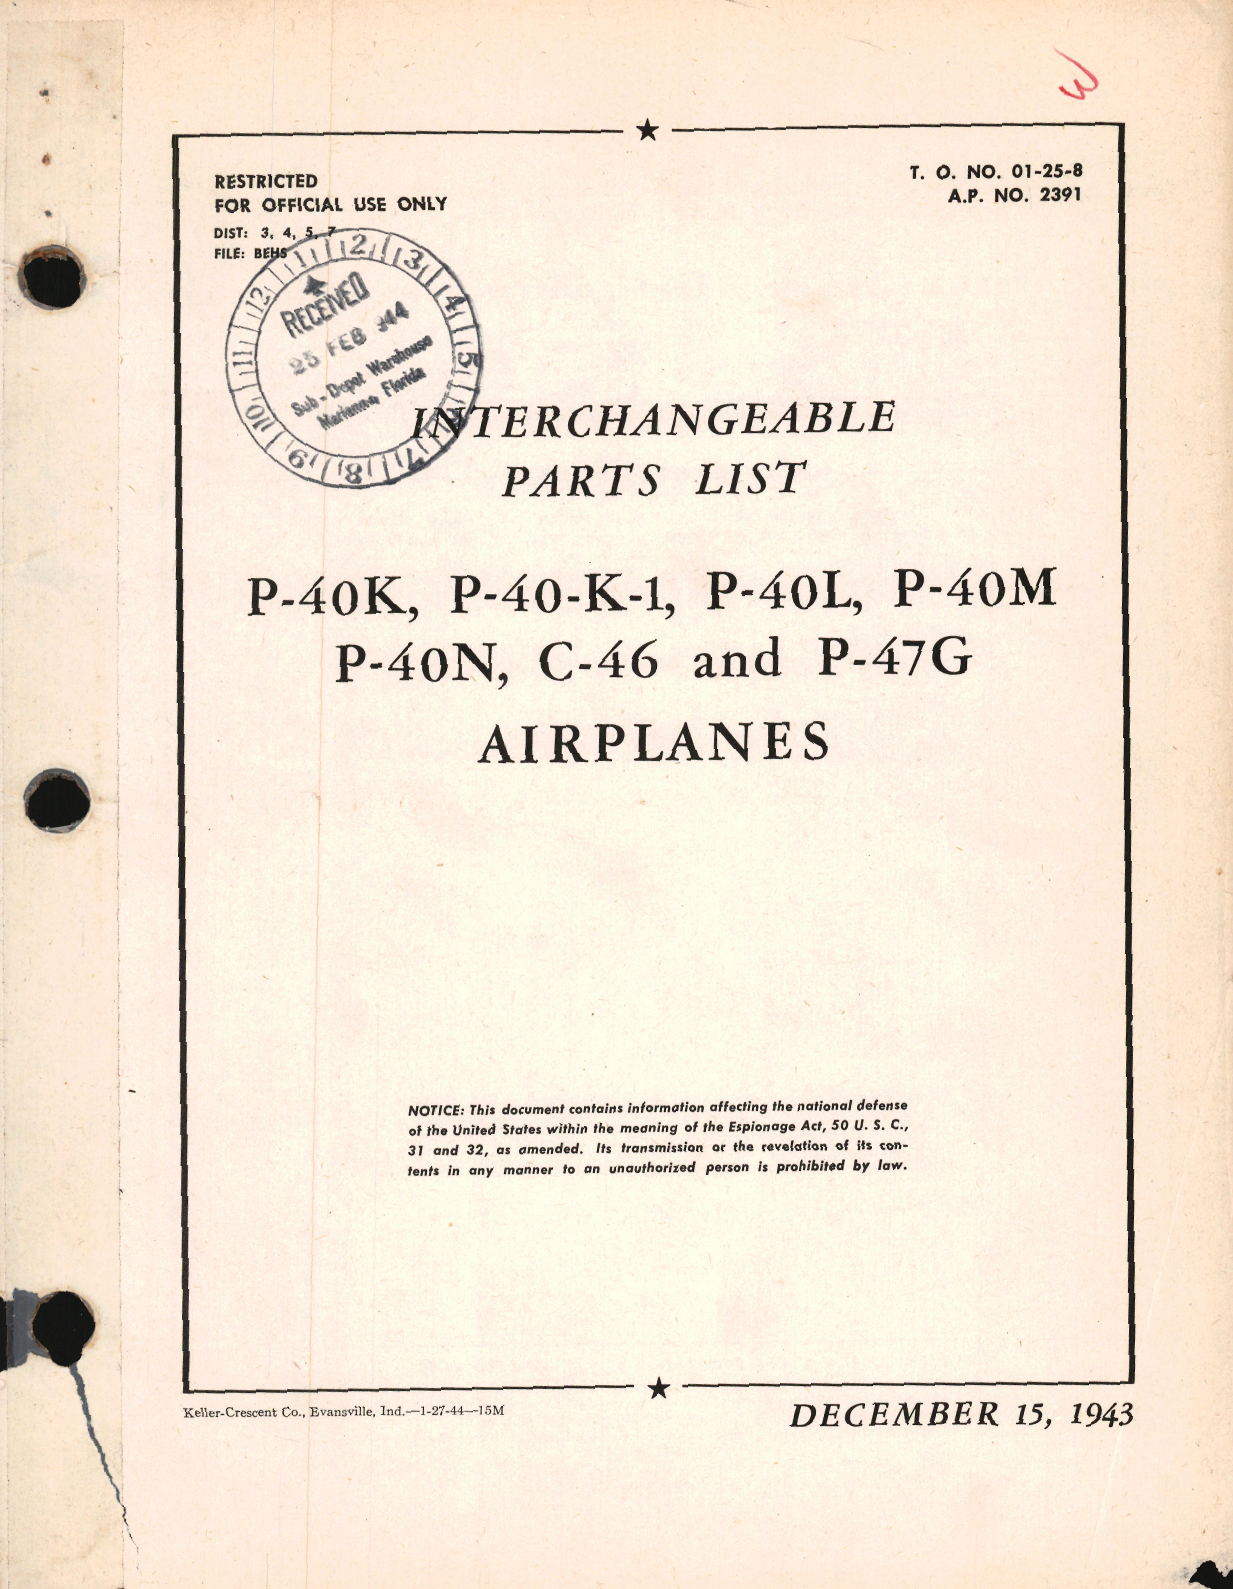 Sample page 1 from AirCorps Library document: Interchangeable Parts List for P-40 Series, C-46, and P-47G